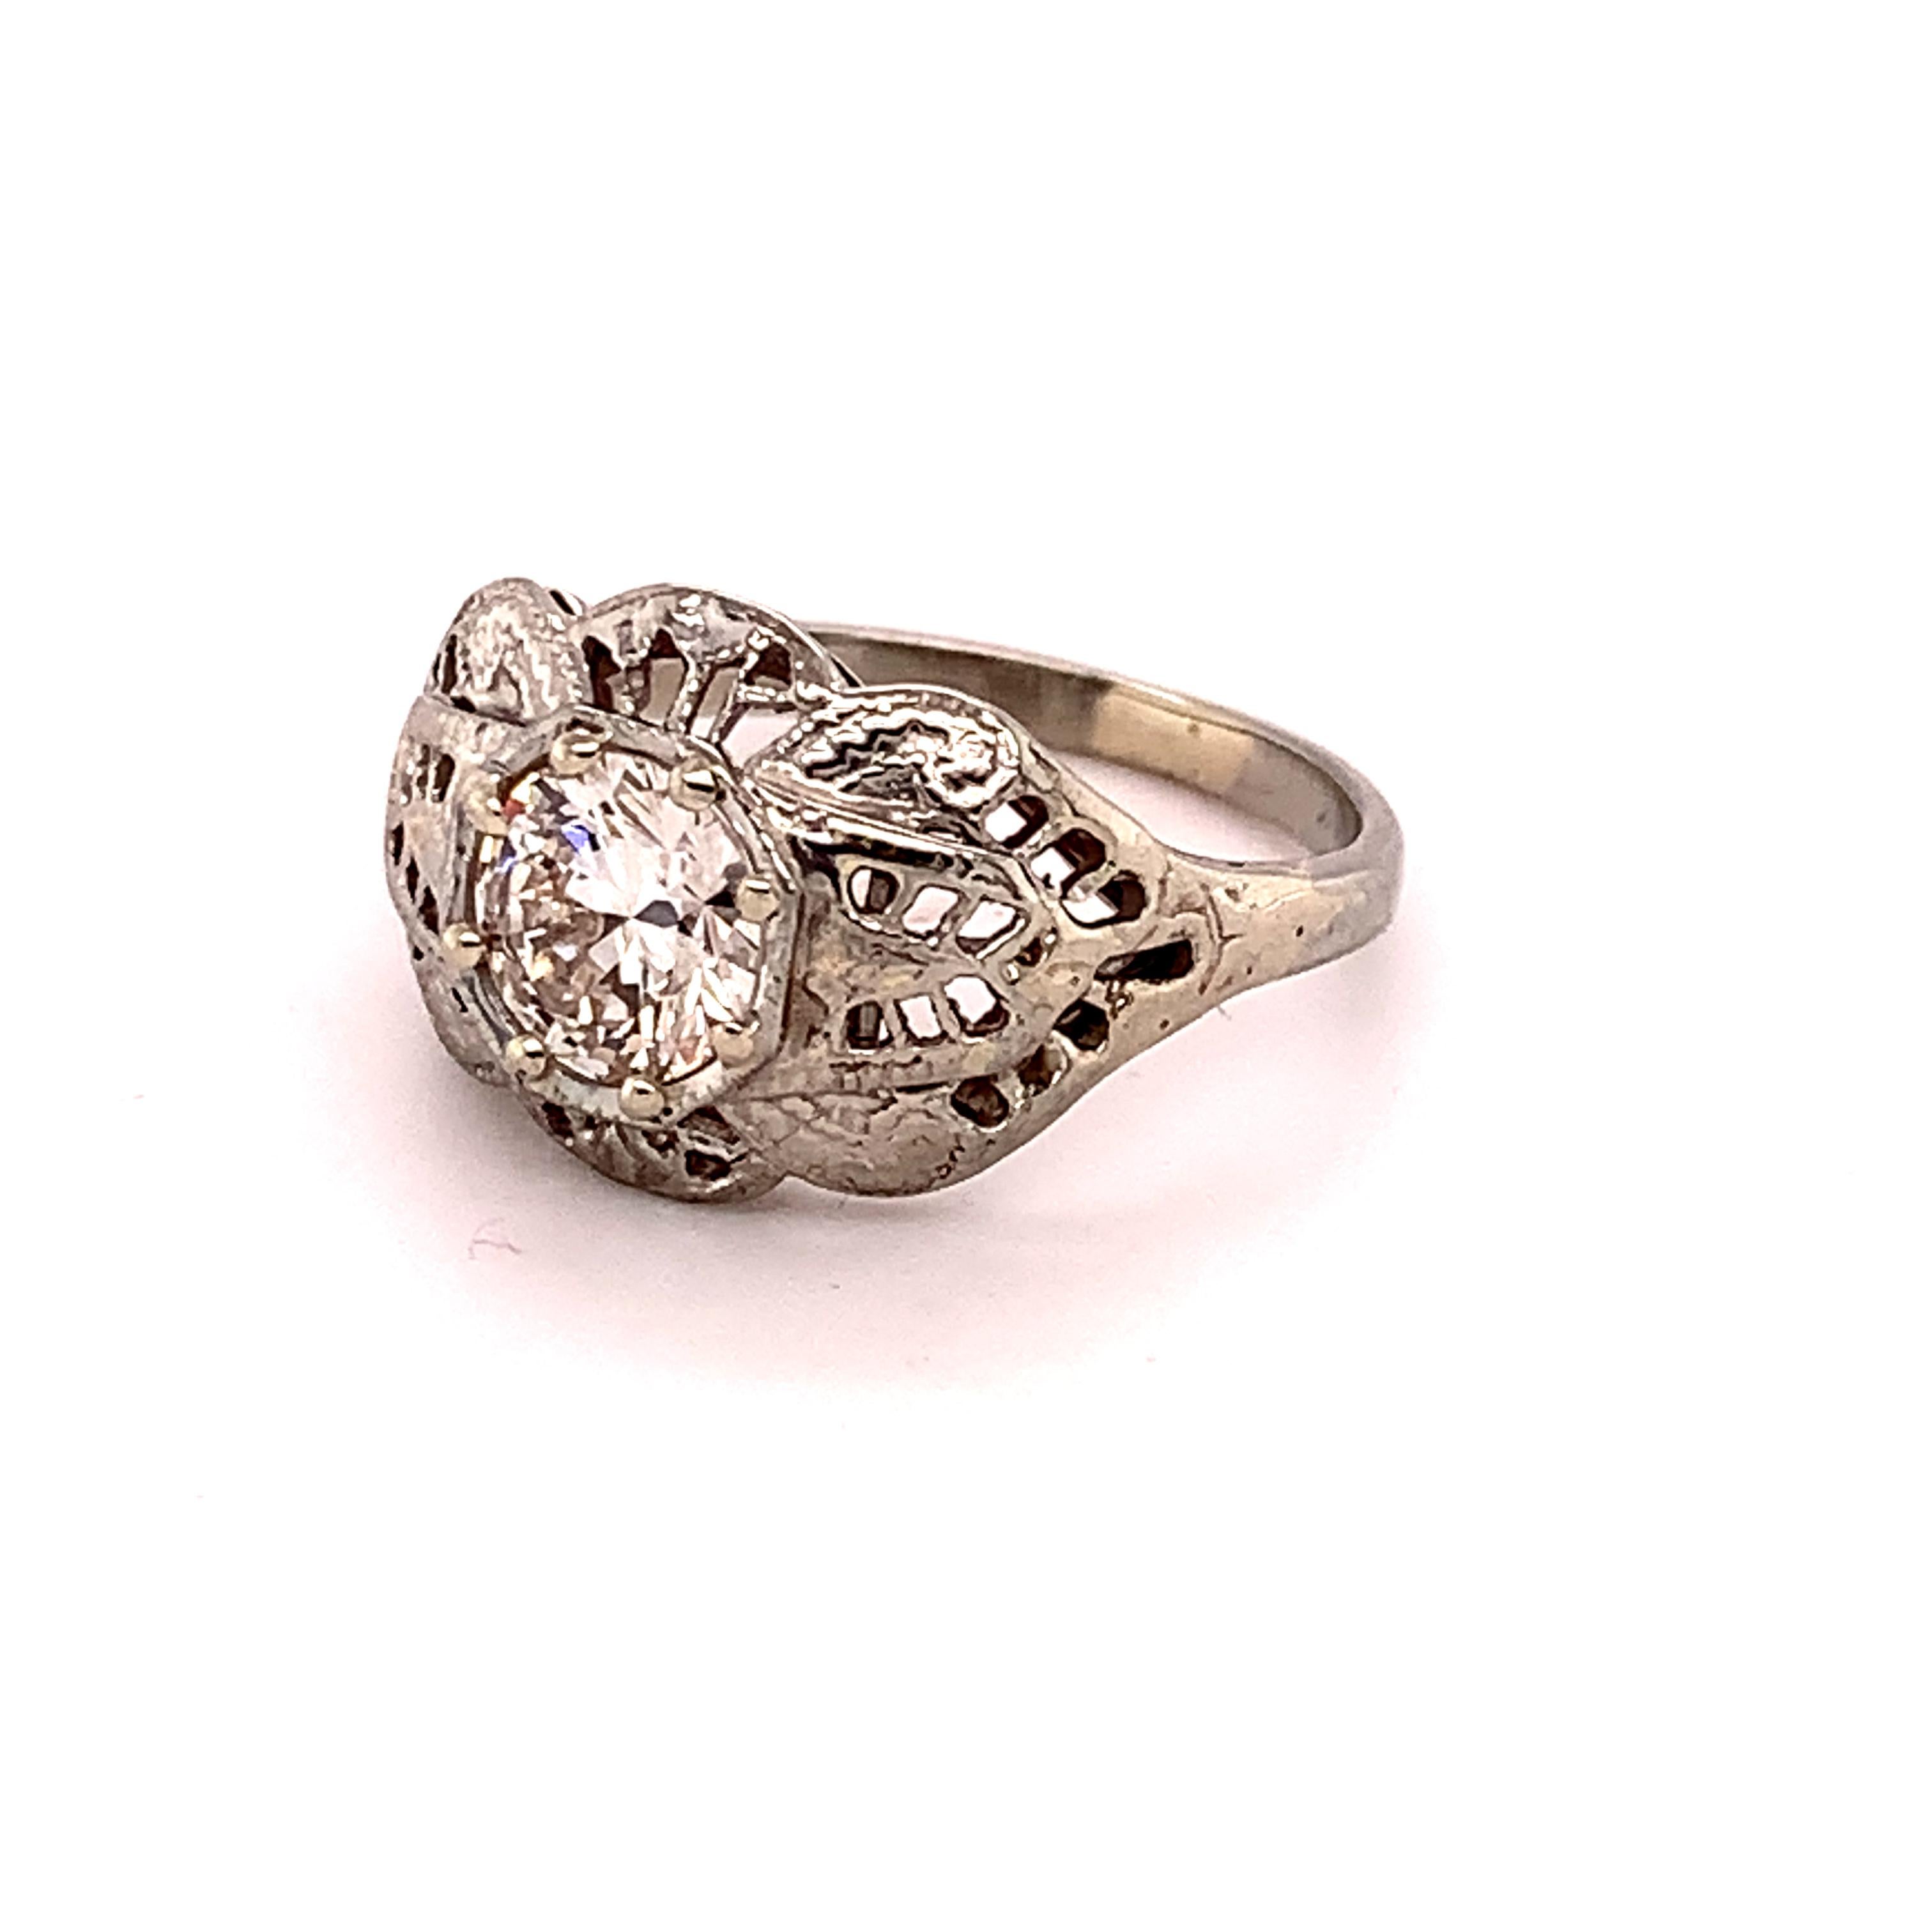 18k White Gold Filigree Art Deco .60ct Genuine Natural Diamond Ring (#J4895)

Art Deco 18k white gold filigree ring featuring a round brilliant cut diamond weighing .60cts. The diamond has VS clarity and I-J color and measures about 5.5mm. The ring